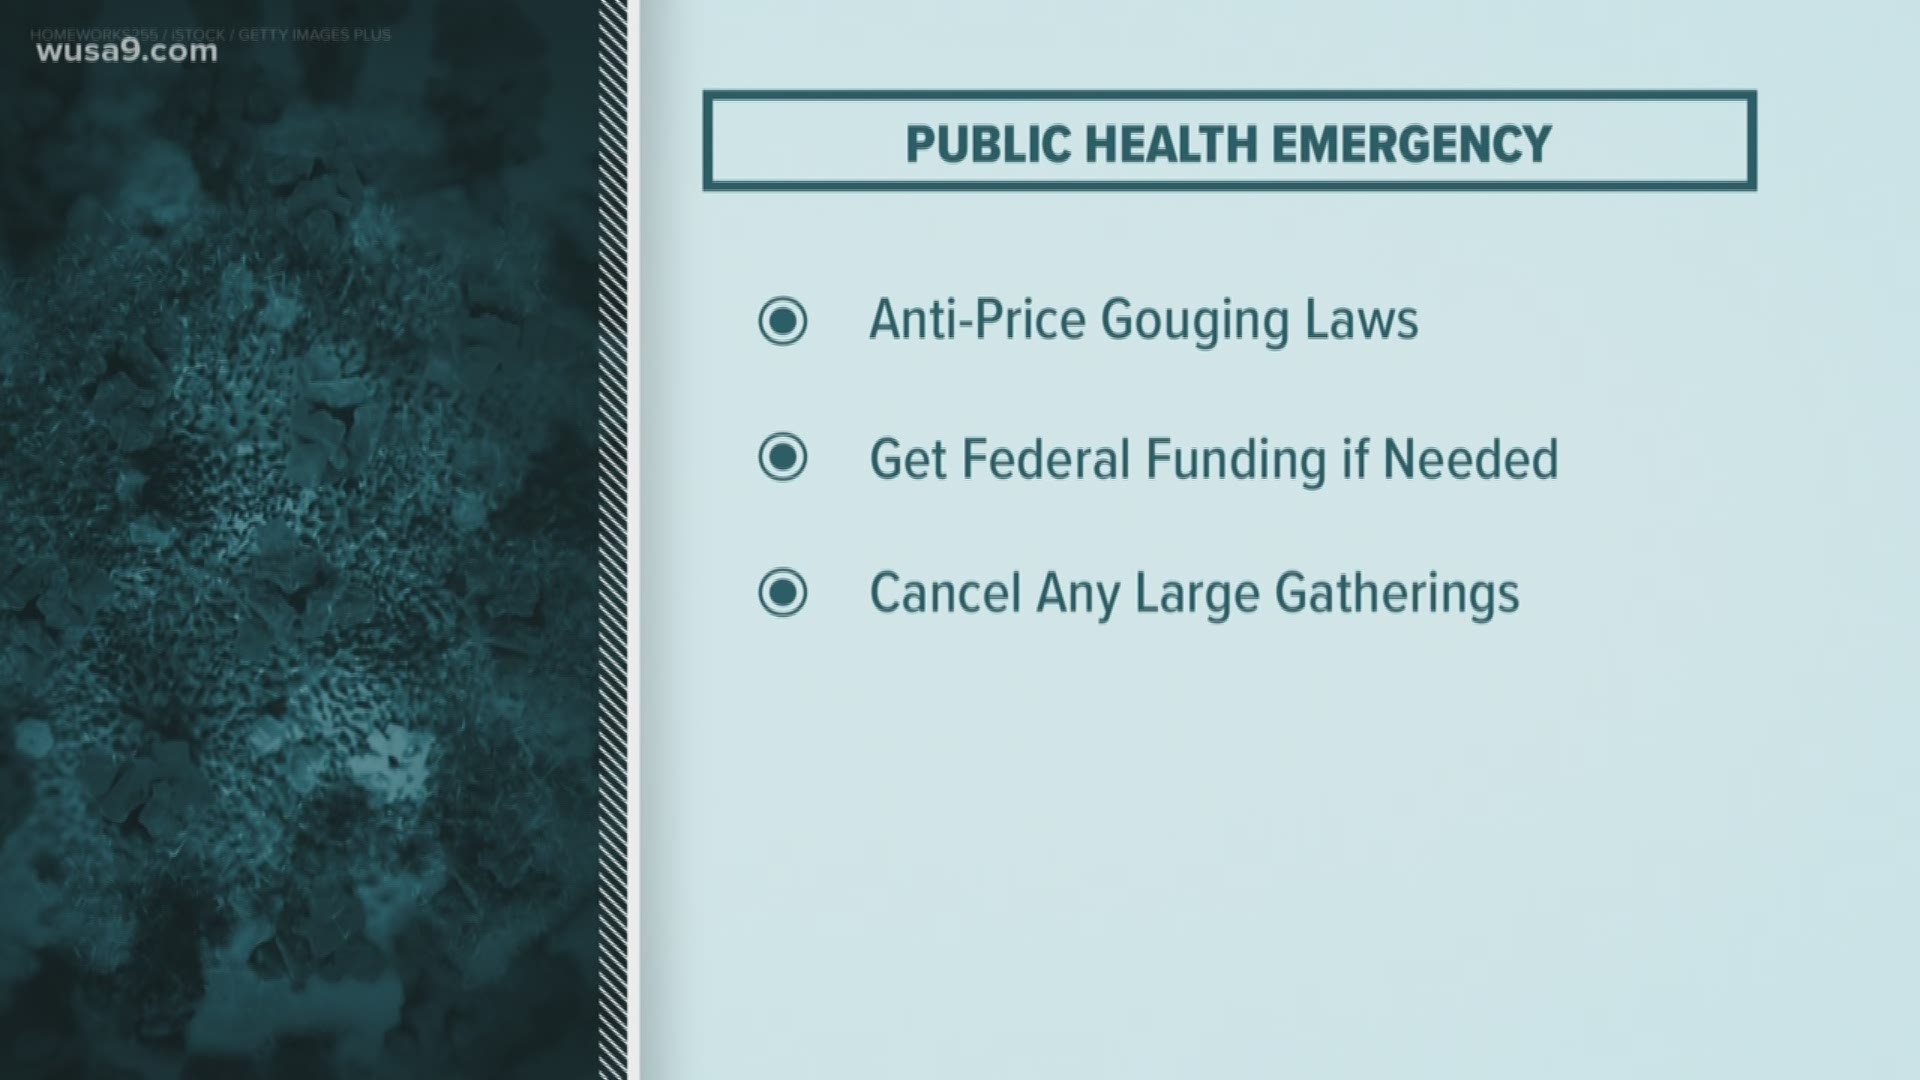 D.C. has declared a state of emergency and a public health emergency for coronavirus. What happens next?